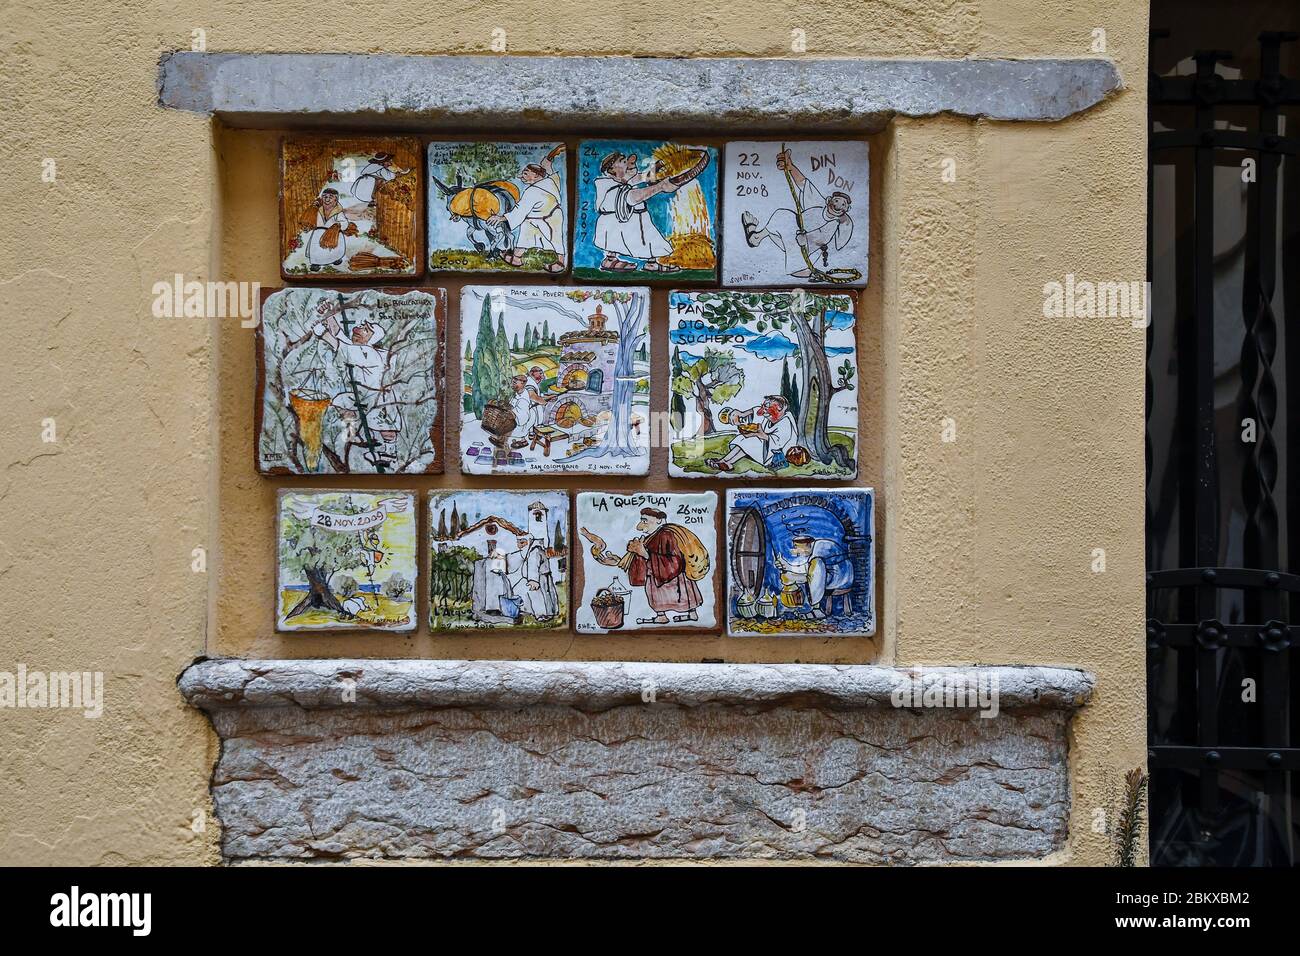 Hand-painted ceramic tiles by Sergio Vellini dedicated to the life of the friars on a wall in the historic center of Bardolino, Verona, Veneto, Italy Stock Photo